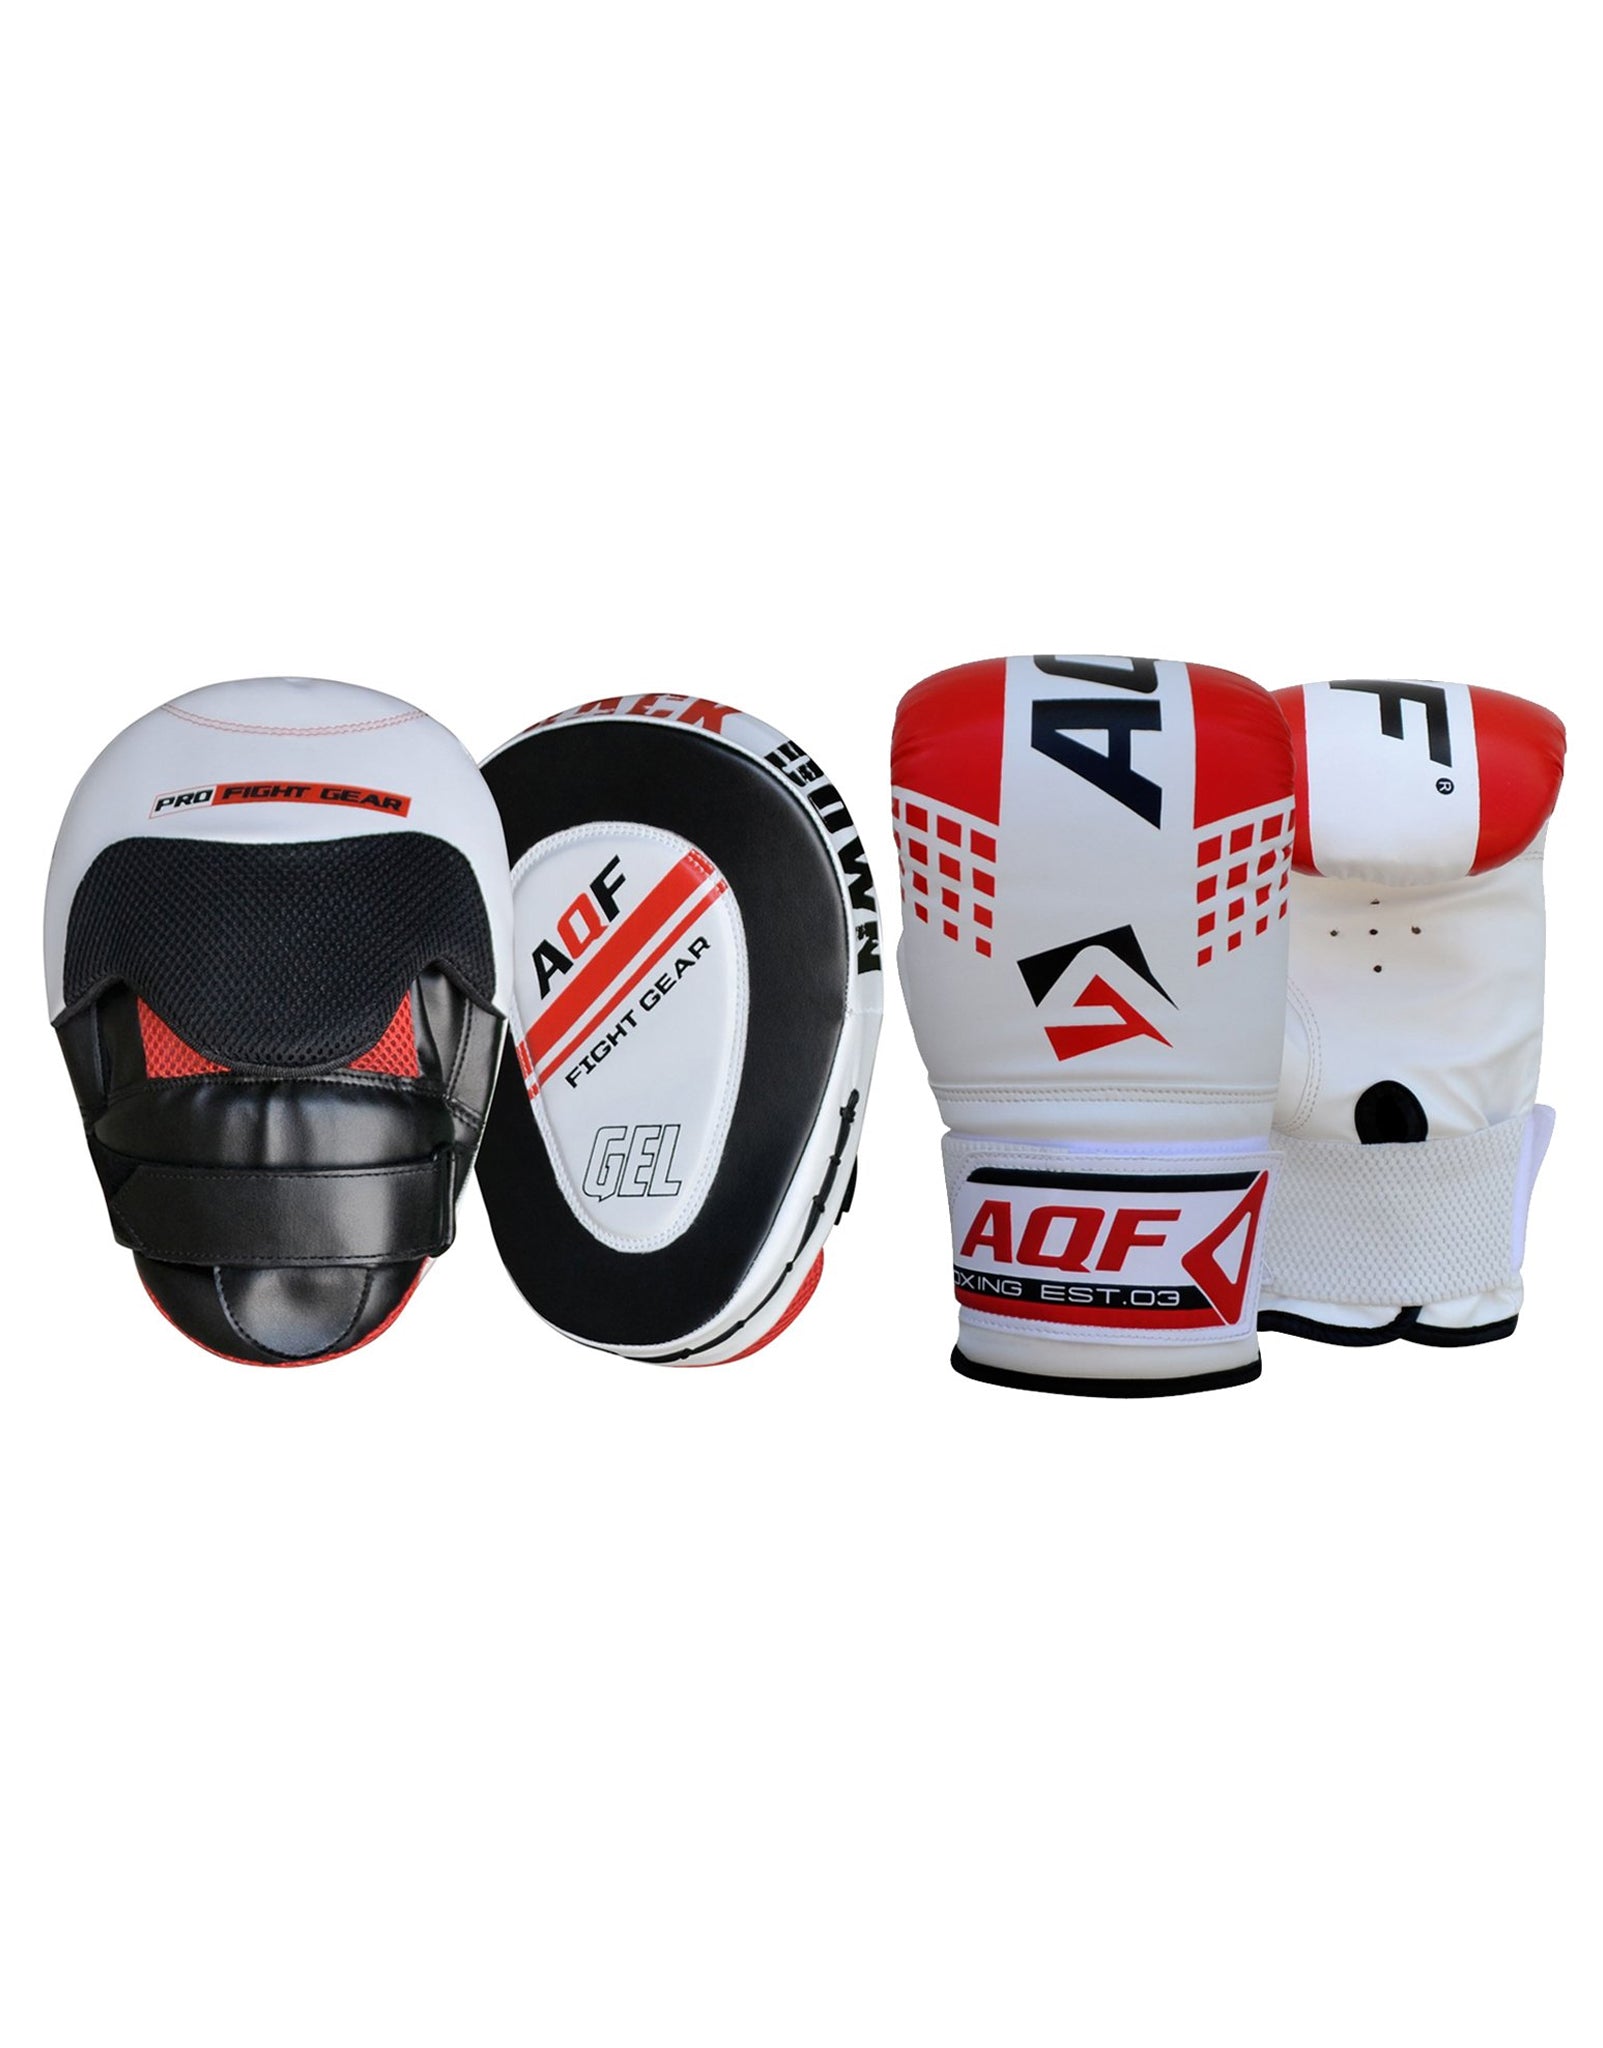 AQF Bag Gloves with Boxing Pads - AQF Sports